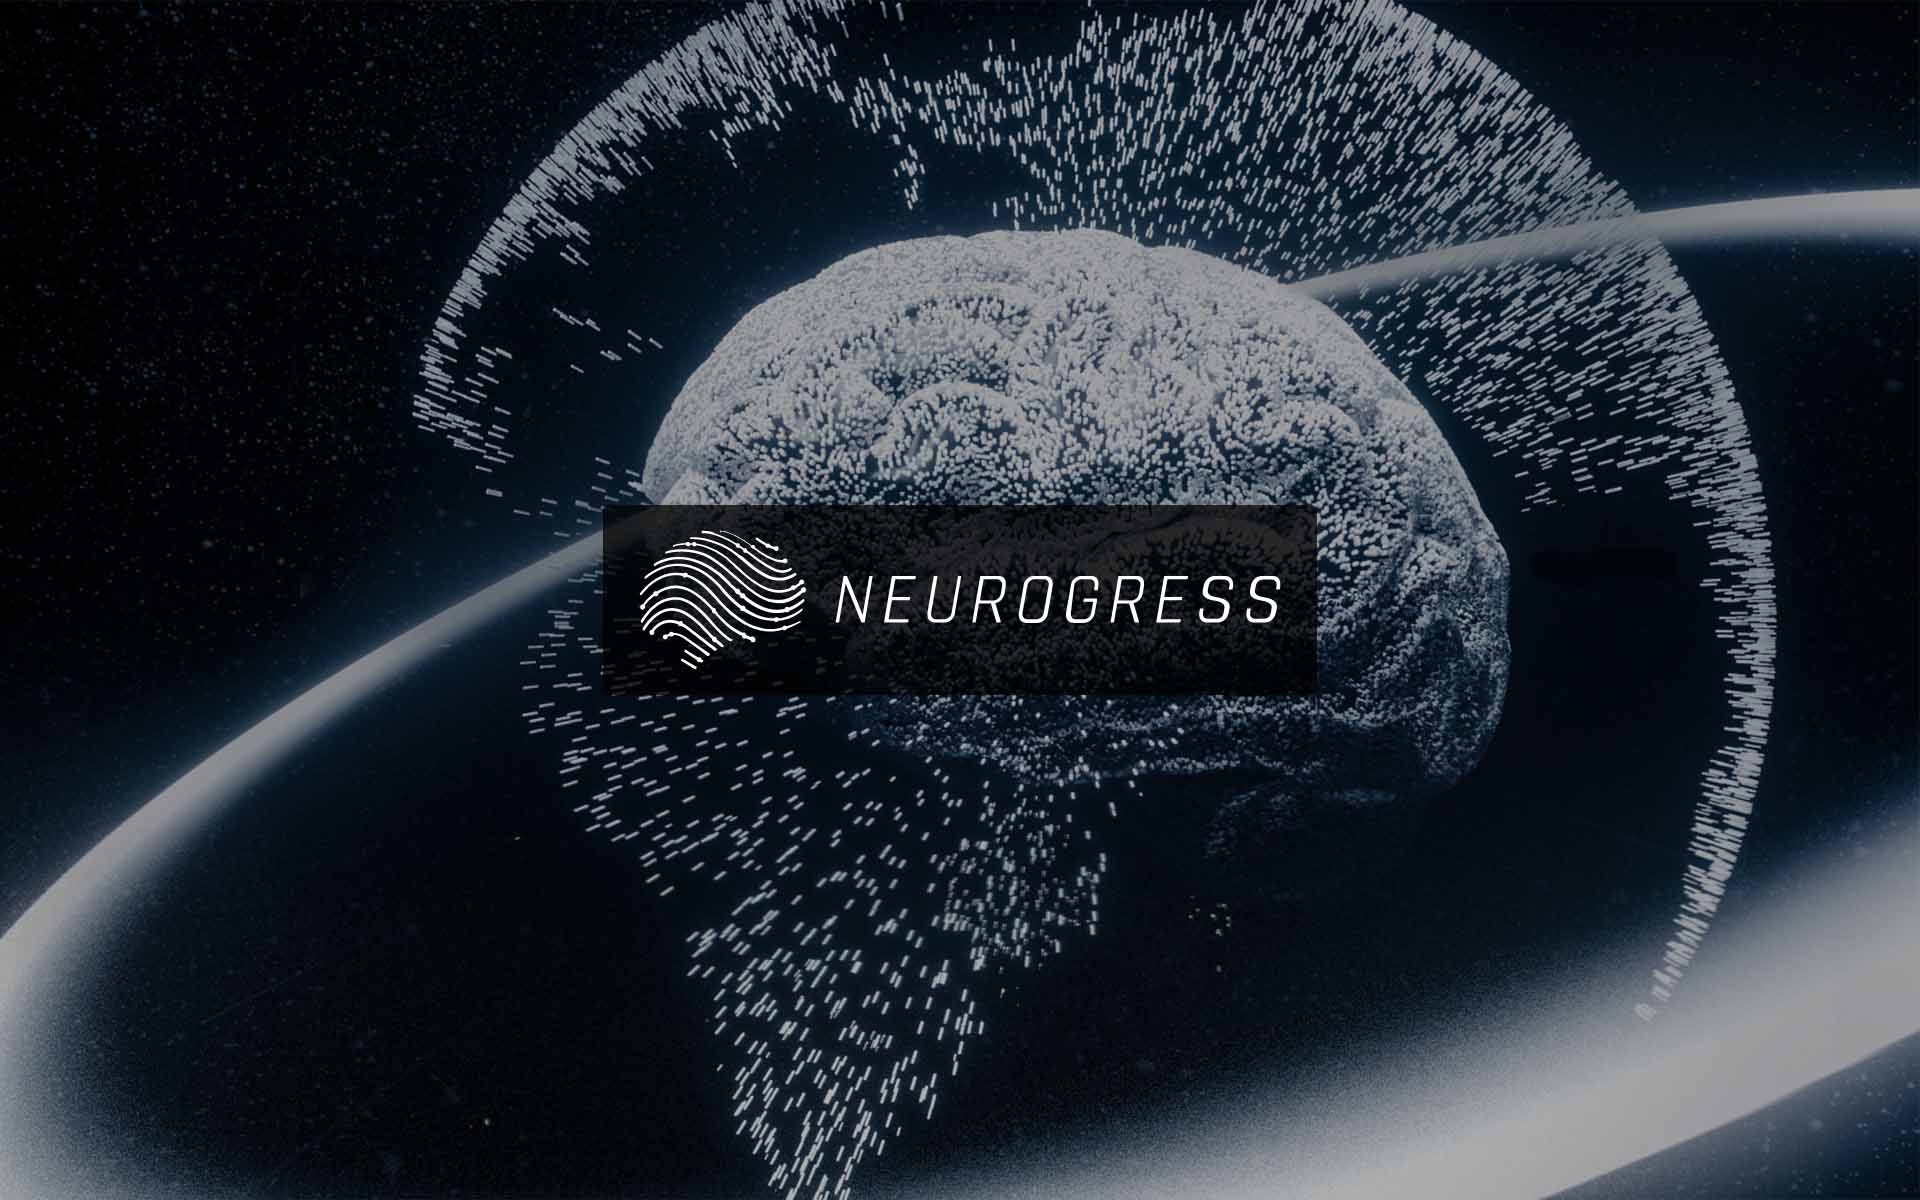 Neurogress Announces Exciting Potential Partnerships with International Organizations to Fasttrack Developments